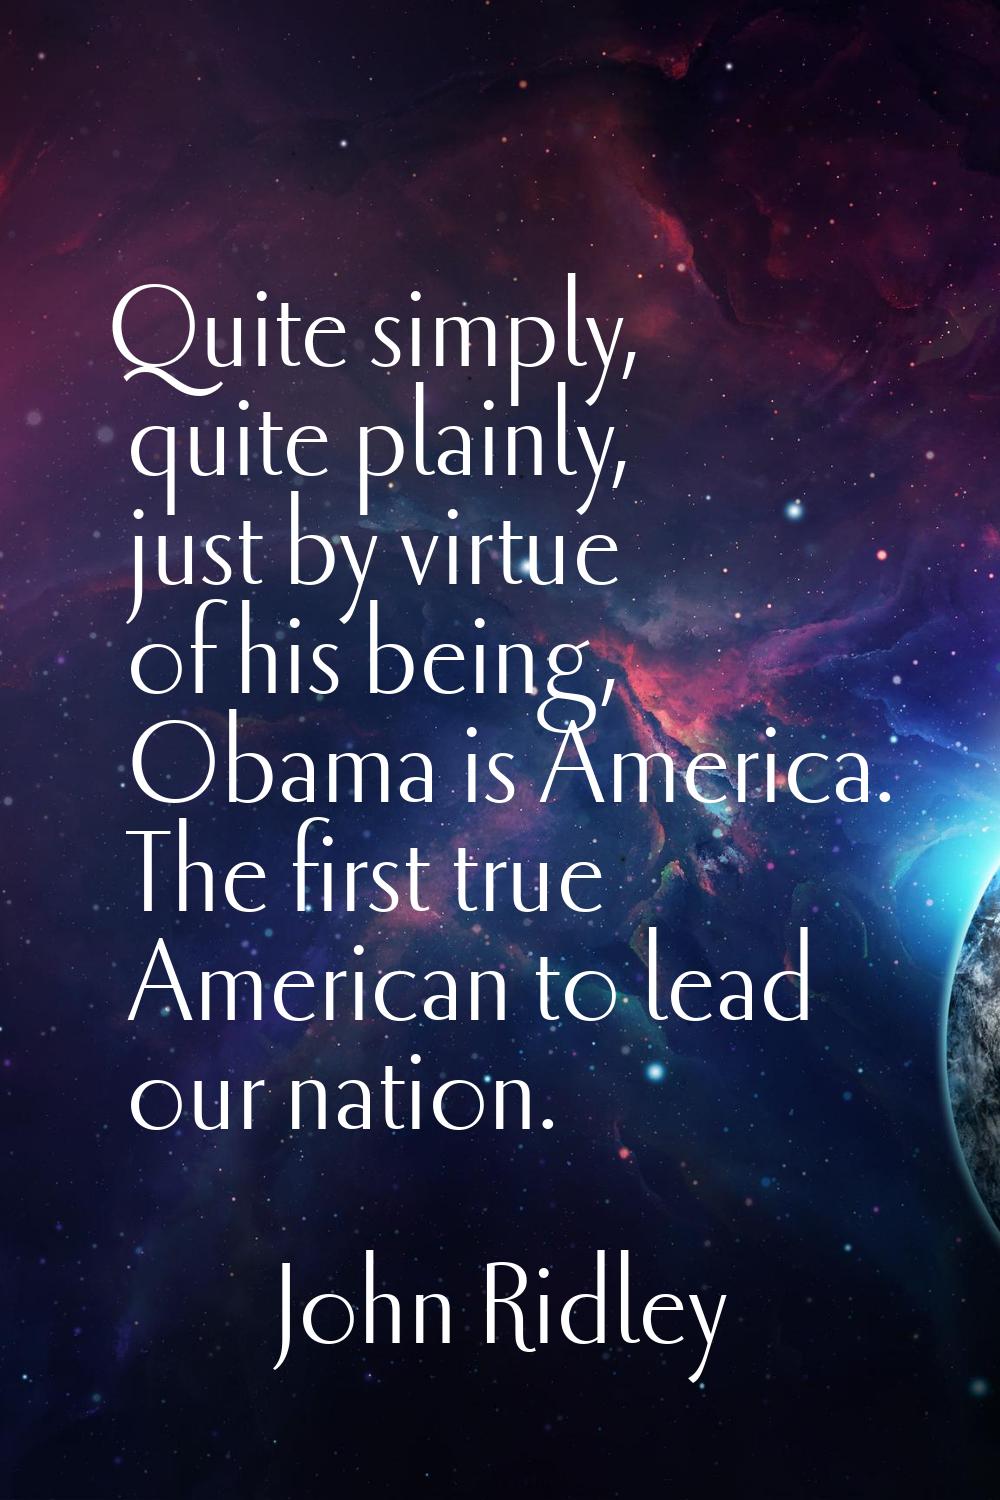 Quite simply, quite plainly, just by virtue of his being, Obama is America. The first true American